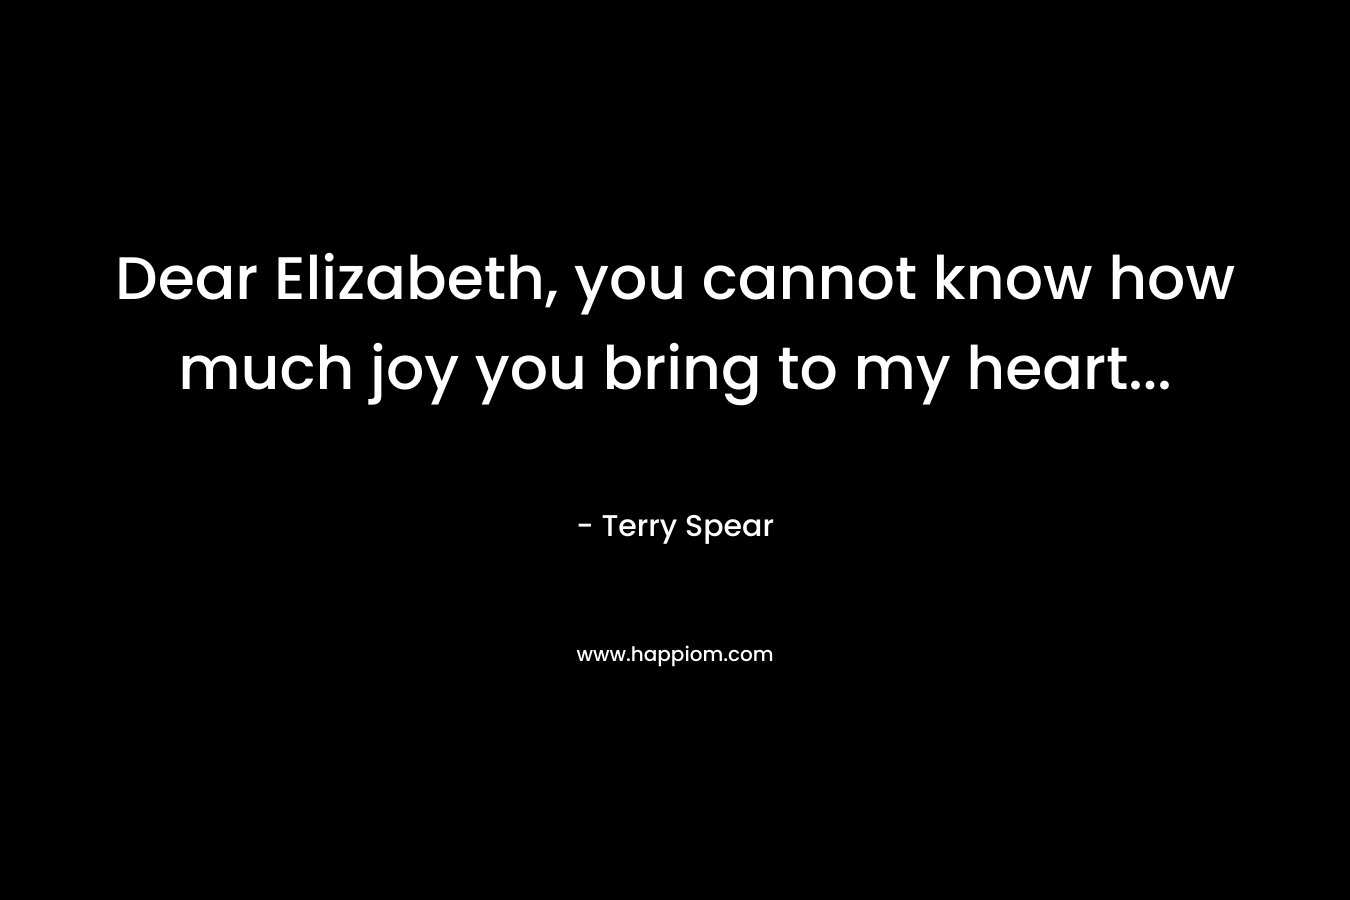 Dear Elizabeth, you cannot know how much joy you bring to my heart...